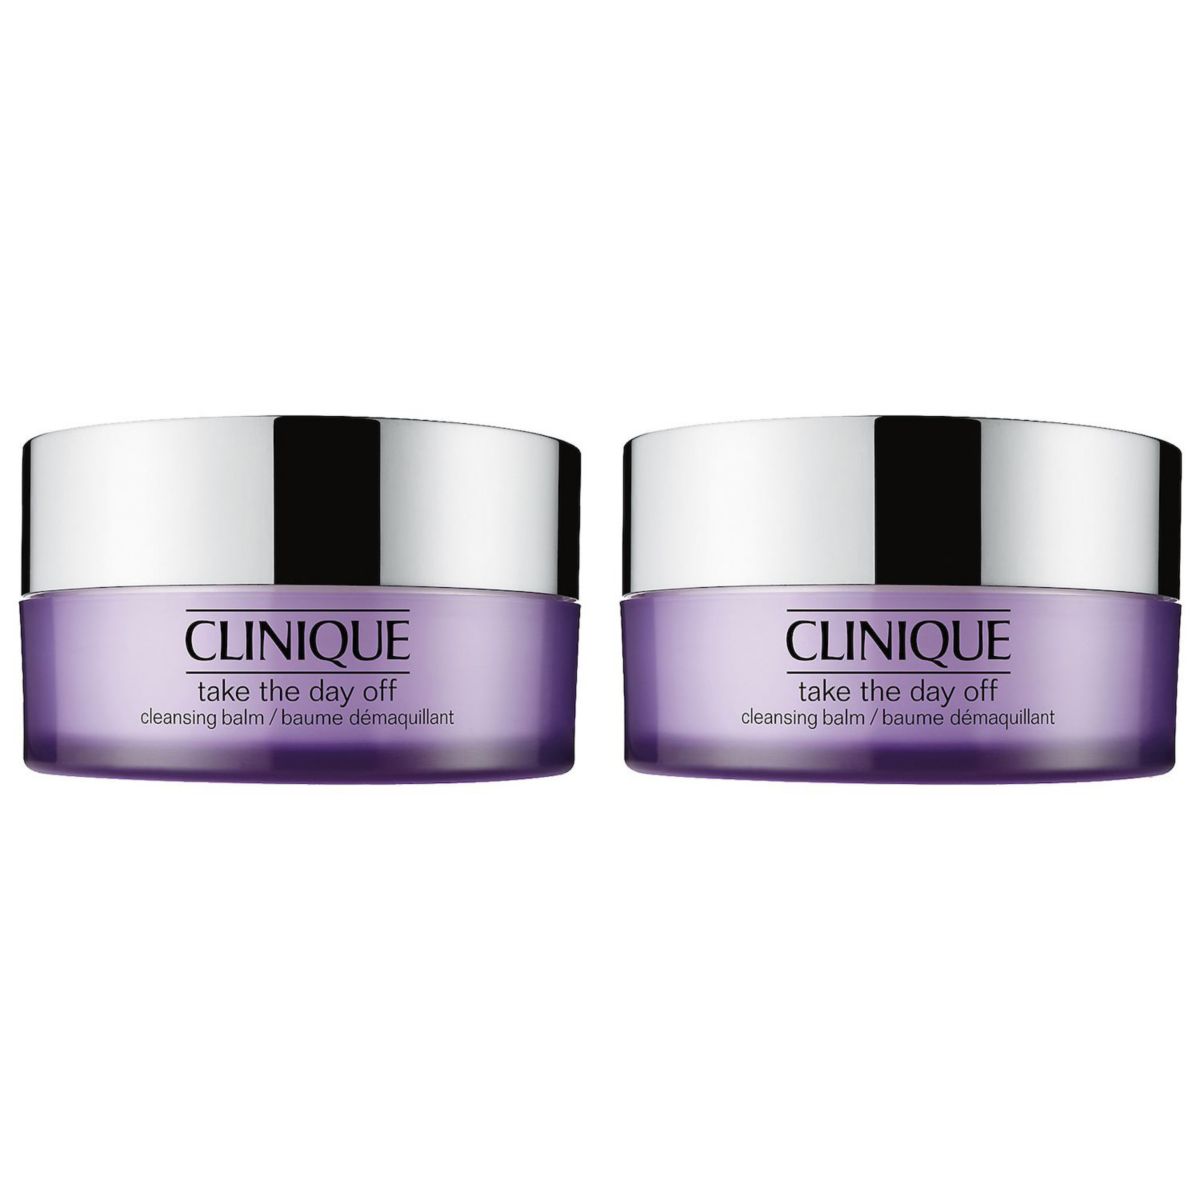 Take the day off cleansing. Clinique take the Day off Cleansing Balm. Clinique take the Day off Cleansing Balm Baume Demaquillant. Clinique take the Day off бальзам. Clinique take the Day off Cleansing Balm с углем.